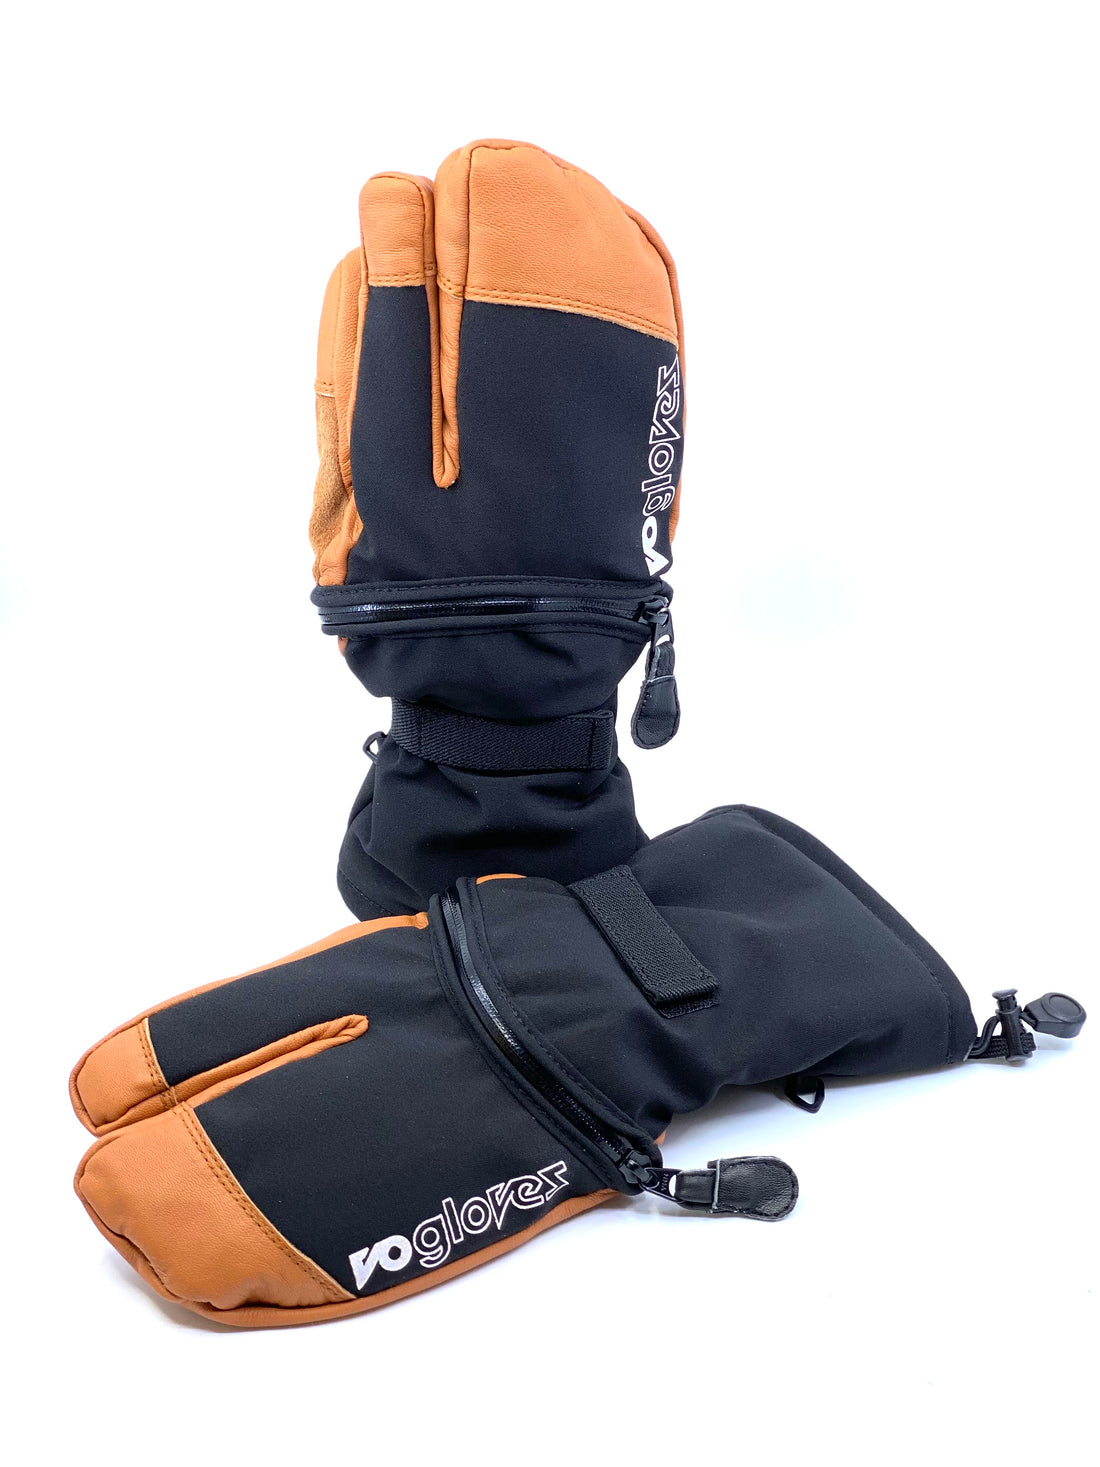 BLACK AND BROWN TRIGGER MITTS